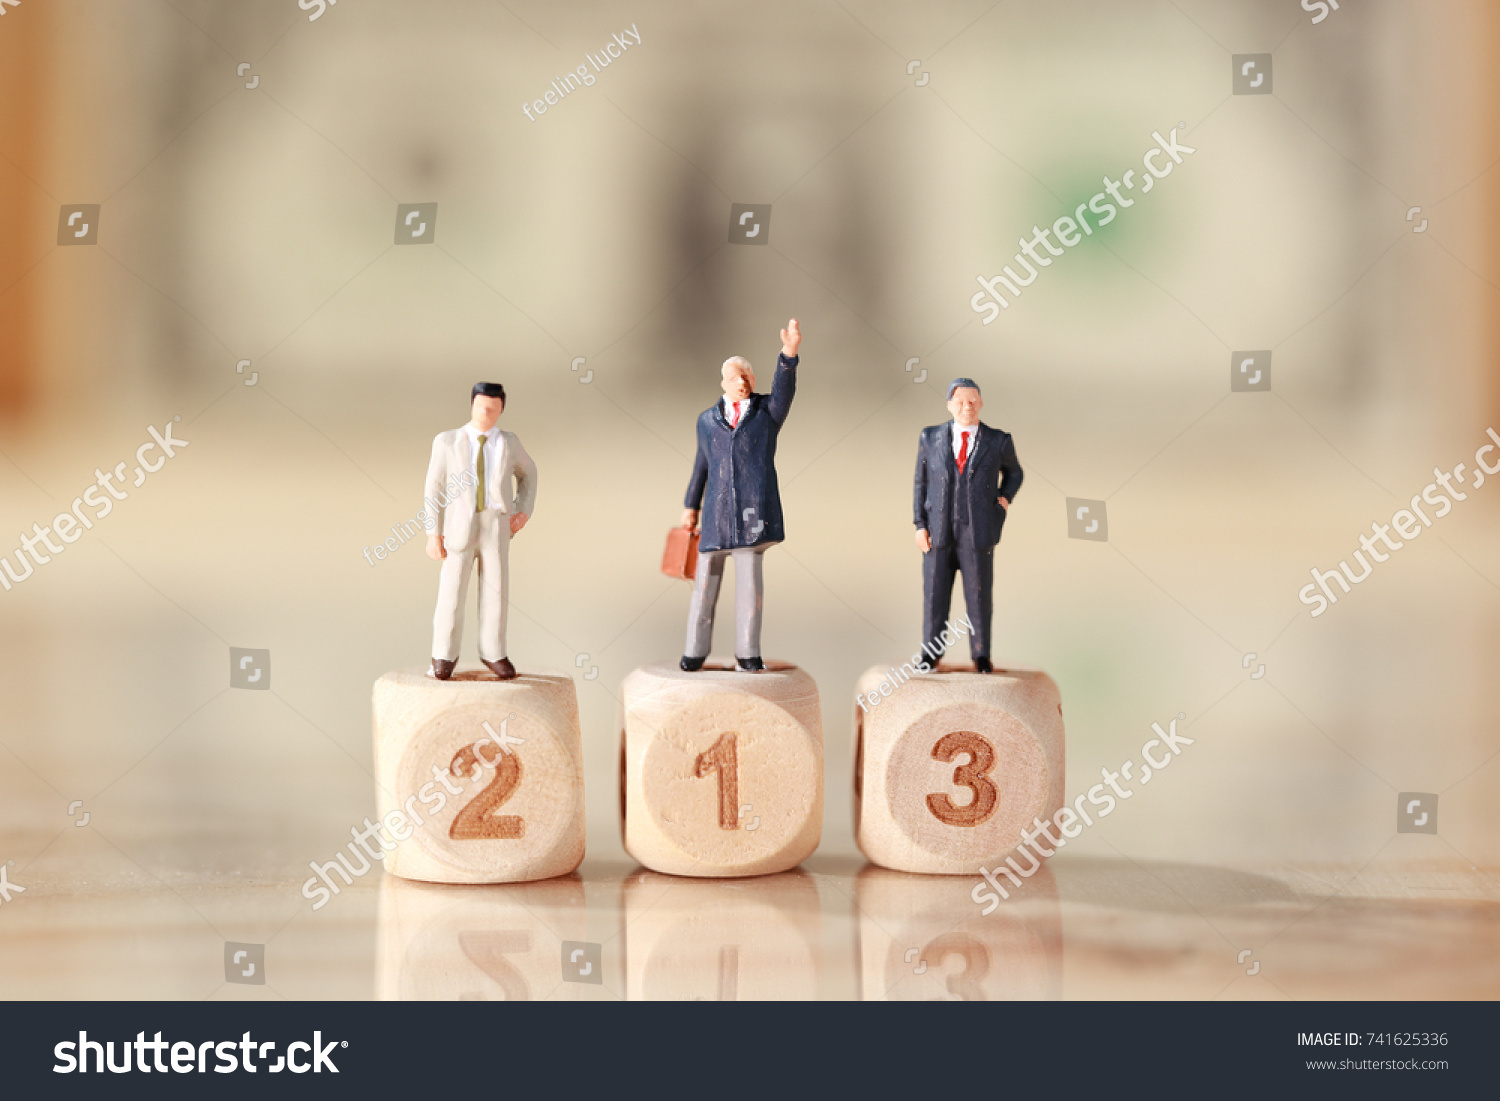 Miniature people: businessman standing on wooden podium with dollar bank note blur background (Financial and Business competition concept) #741625336